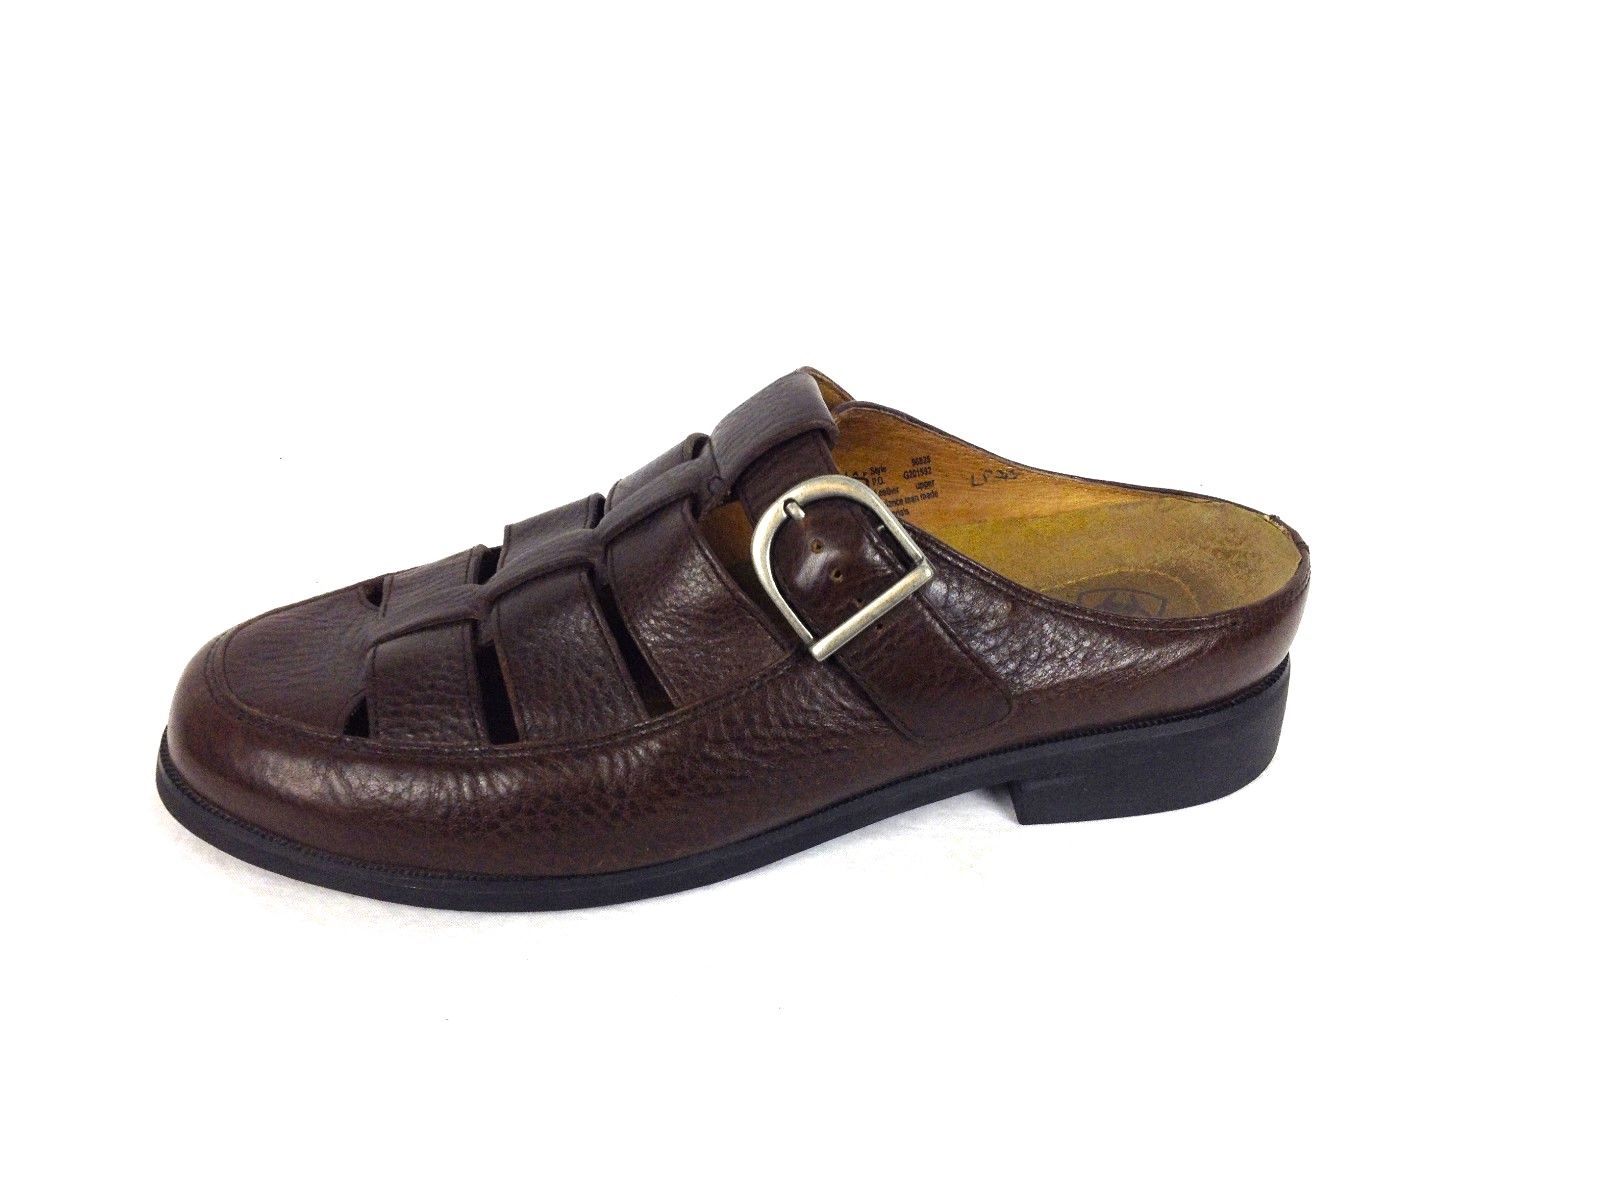 Ariat Shoes 9 Womens Brown Leather Loafers For Sale - Item ...